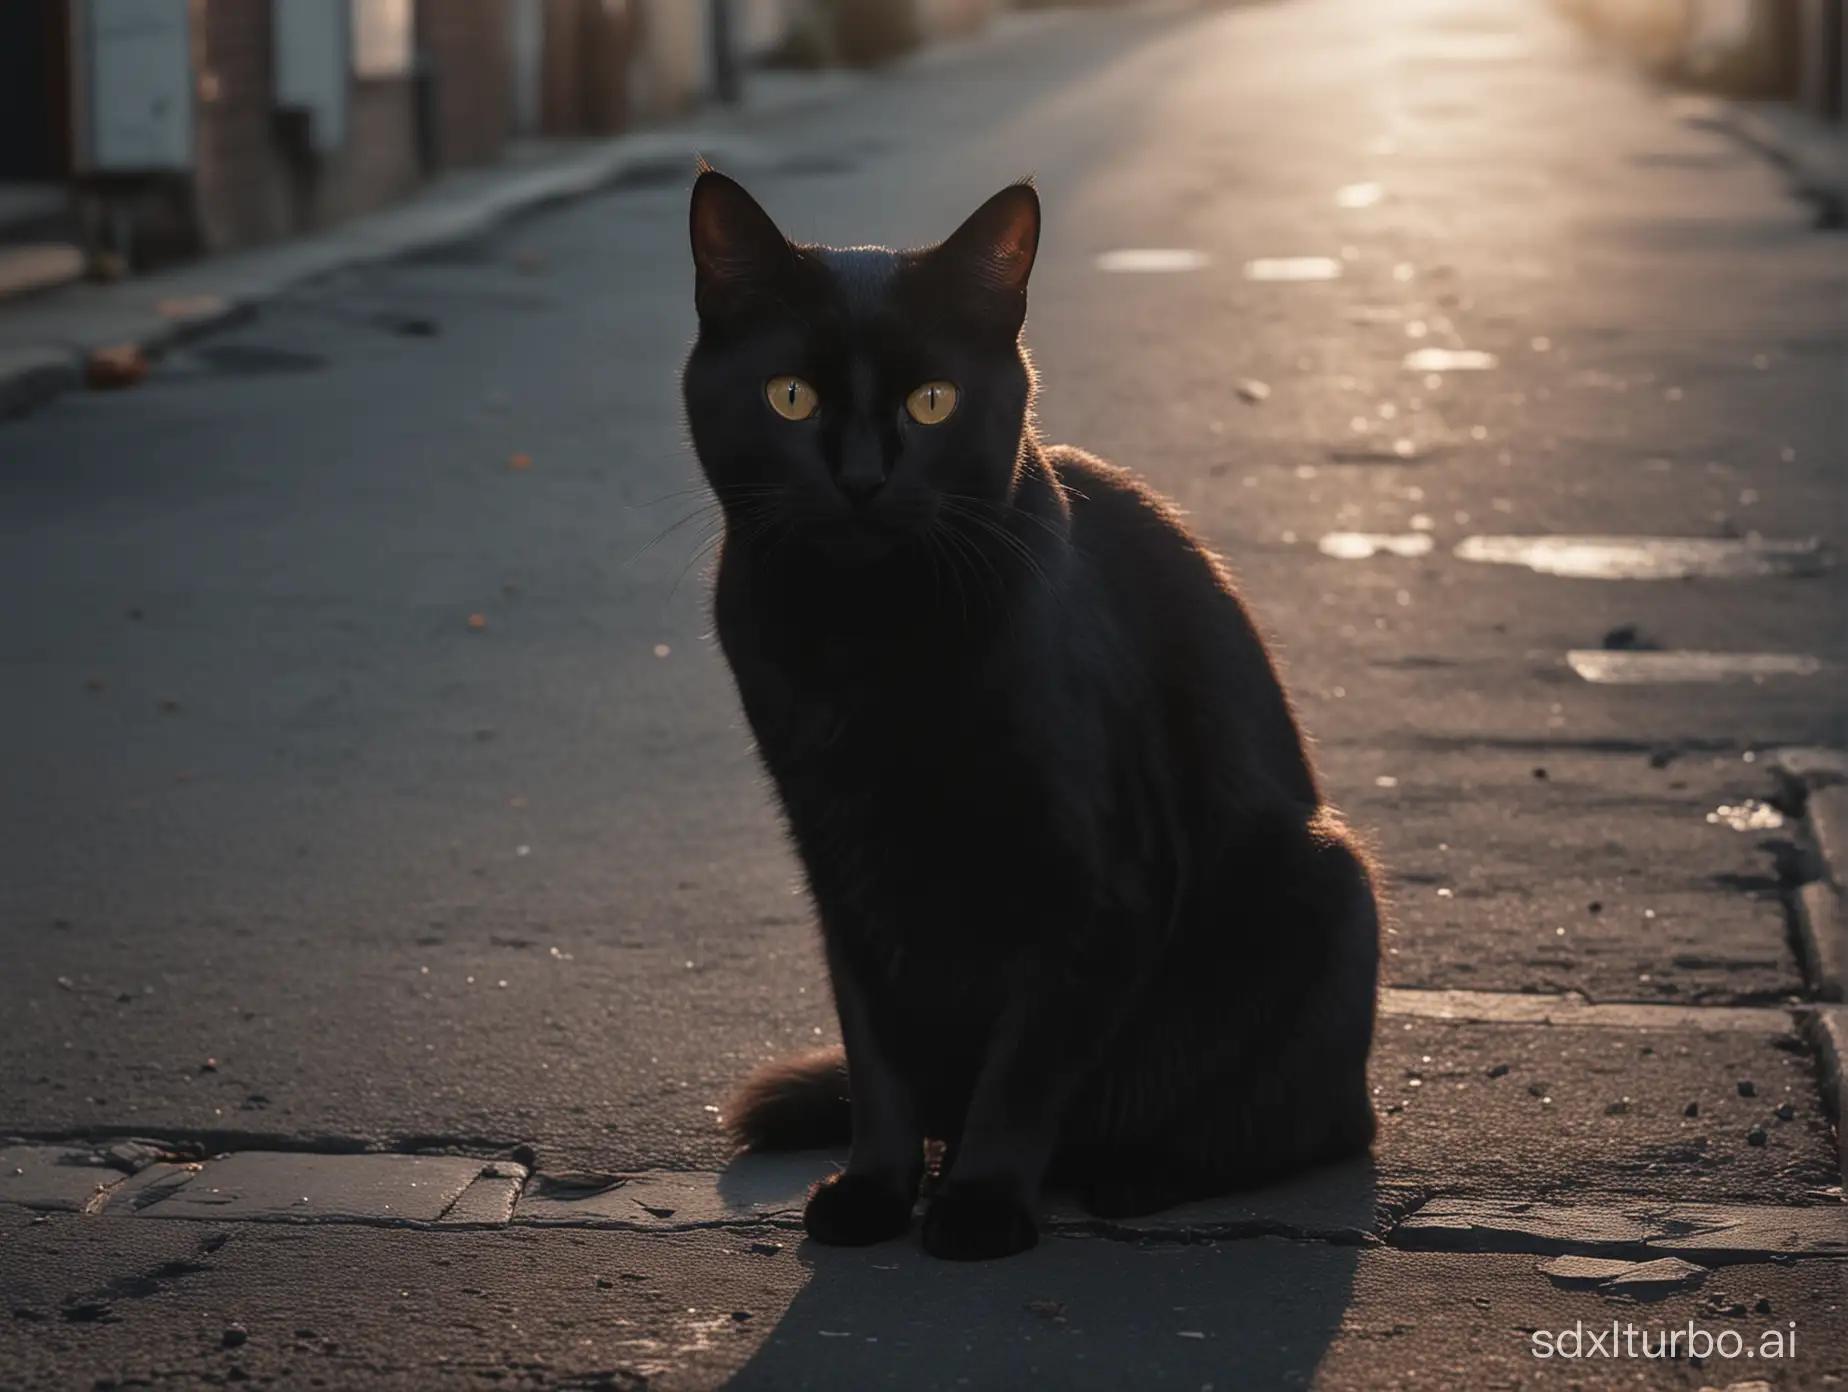 Mysterious-Cinematic-Black-Cat-in-Stunning-8K-Resolution